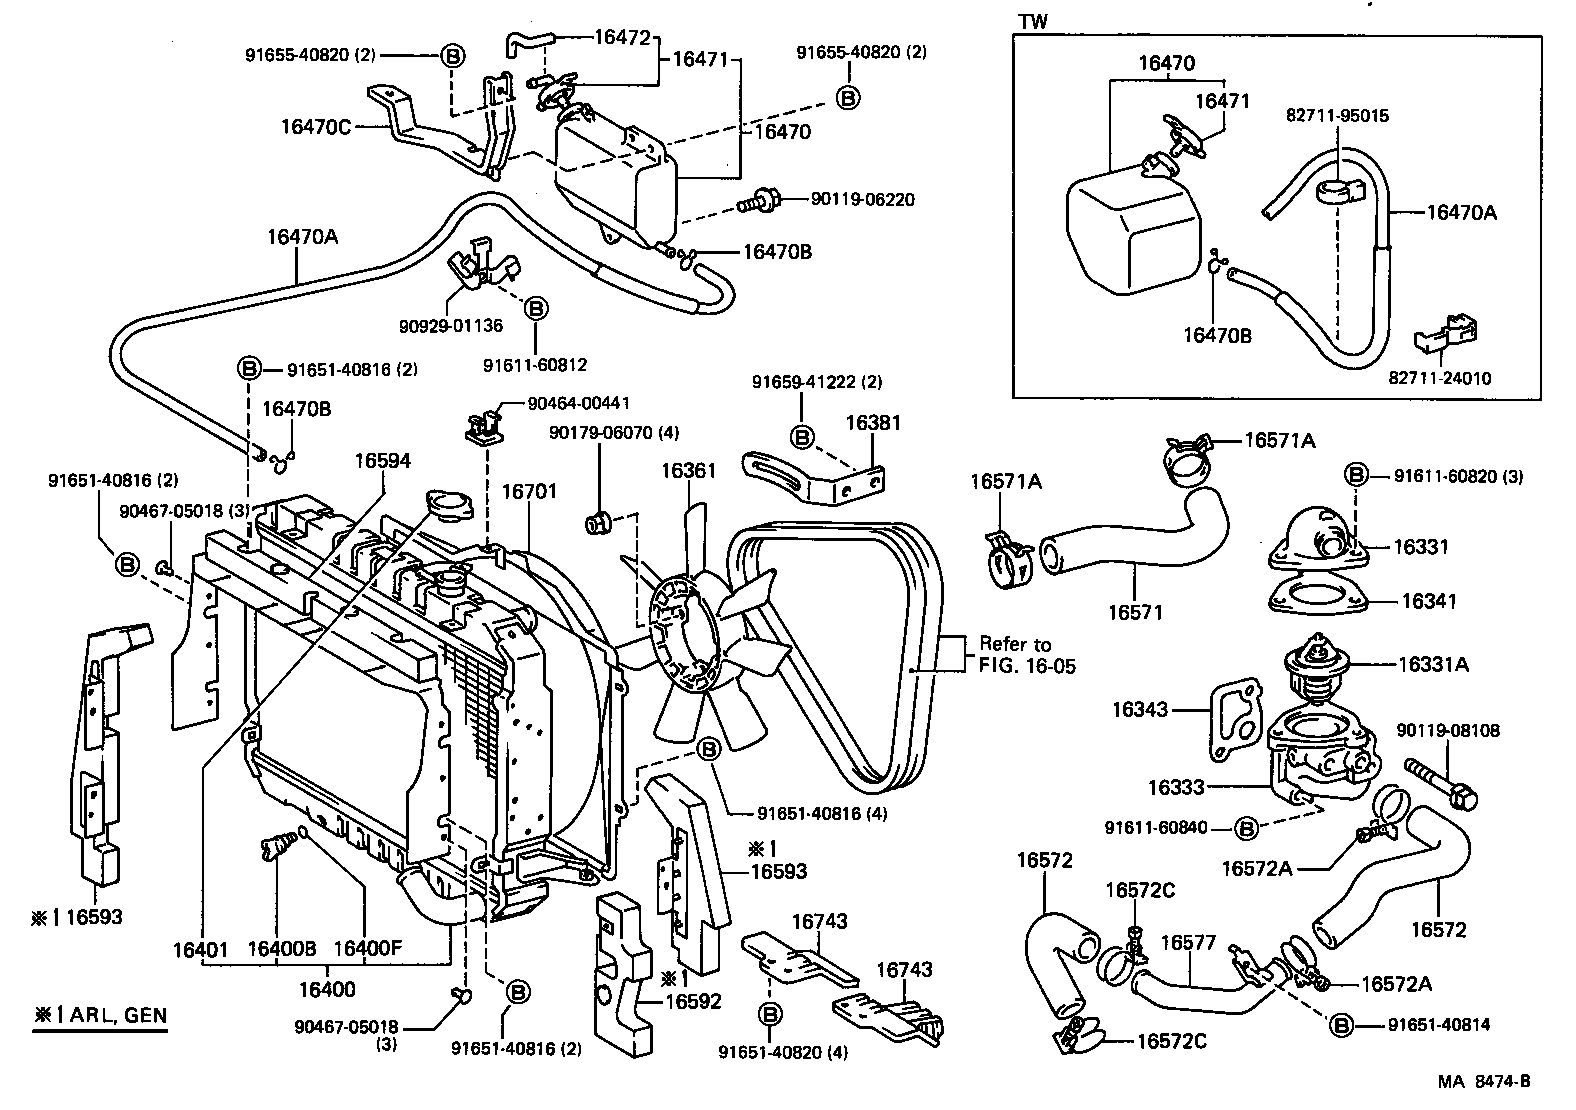  DYNA100 |  RADIATOR WATER OUTLET